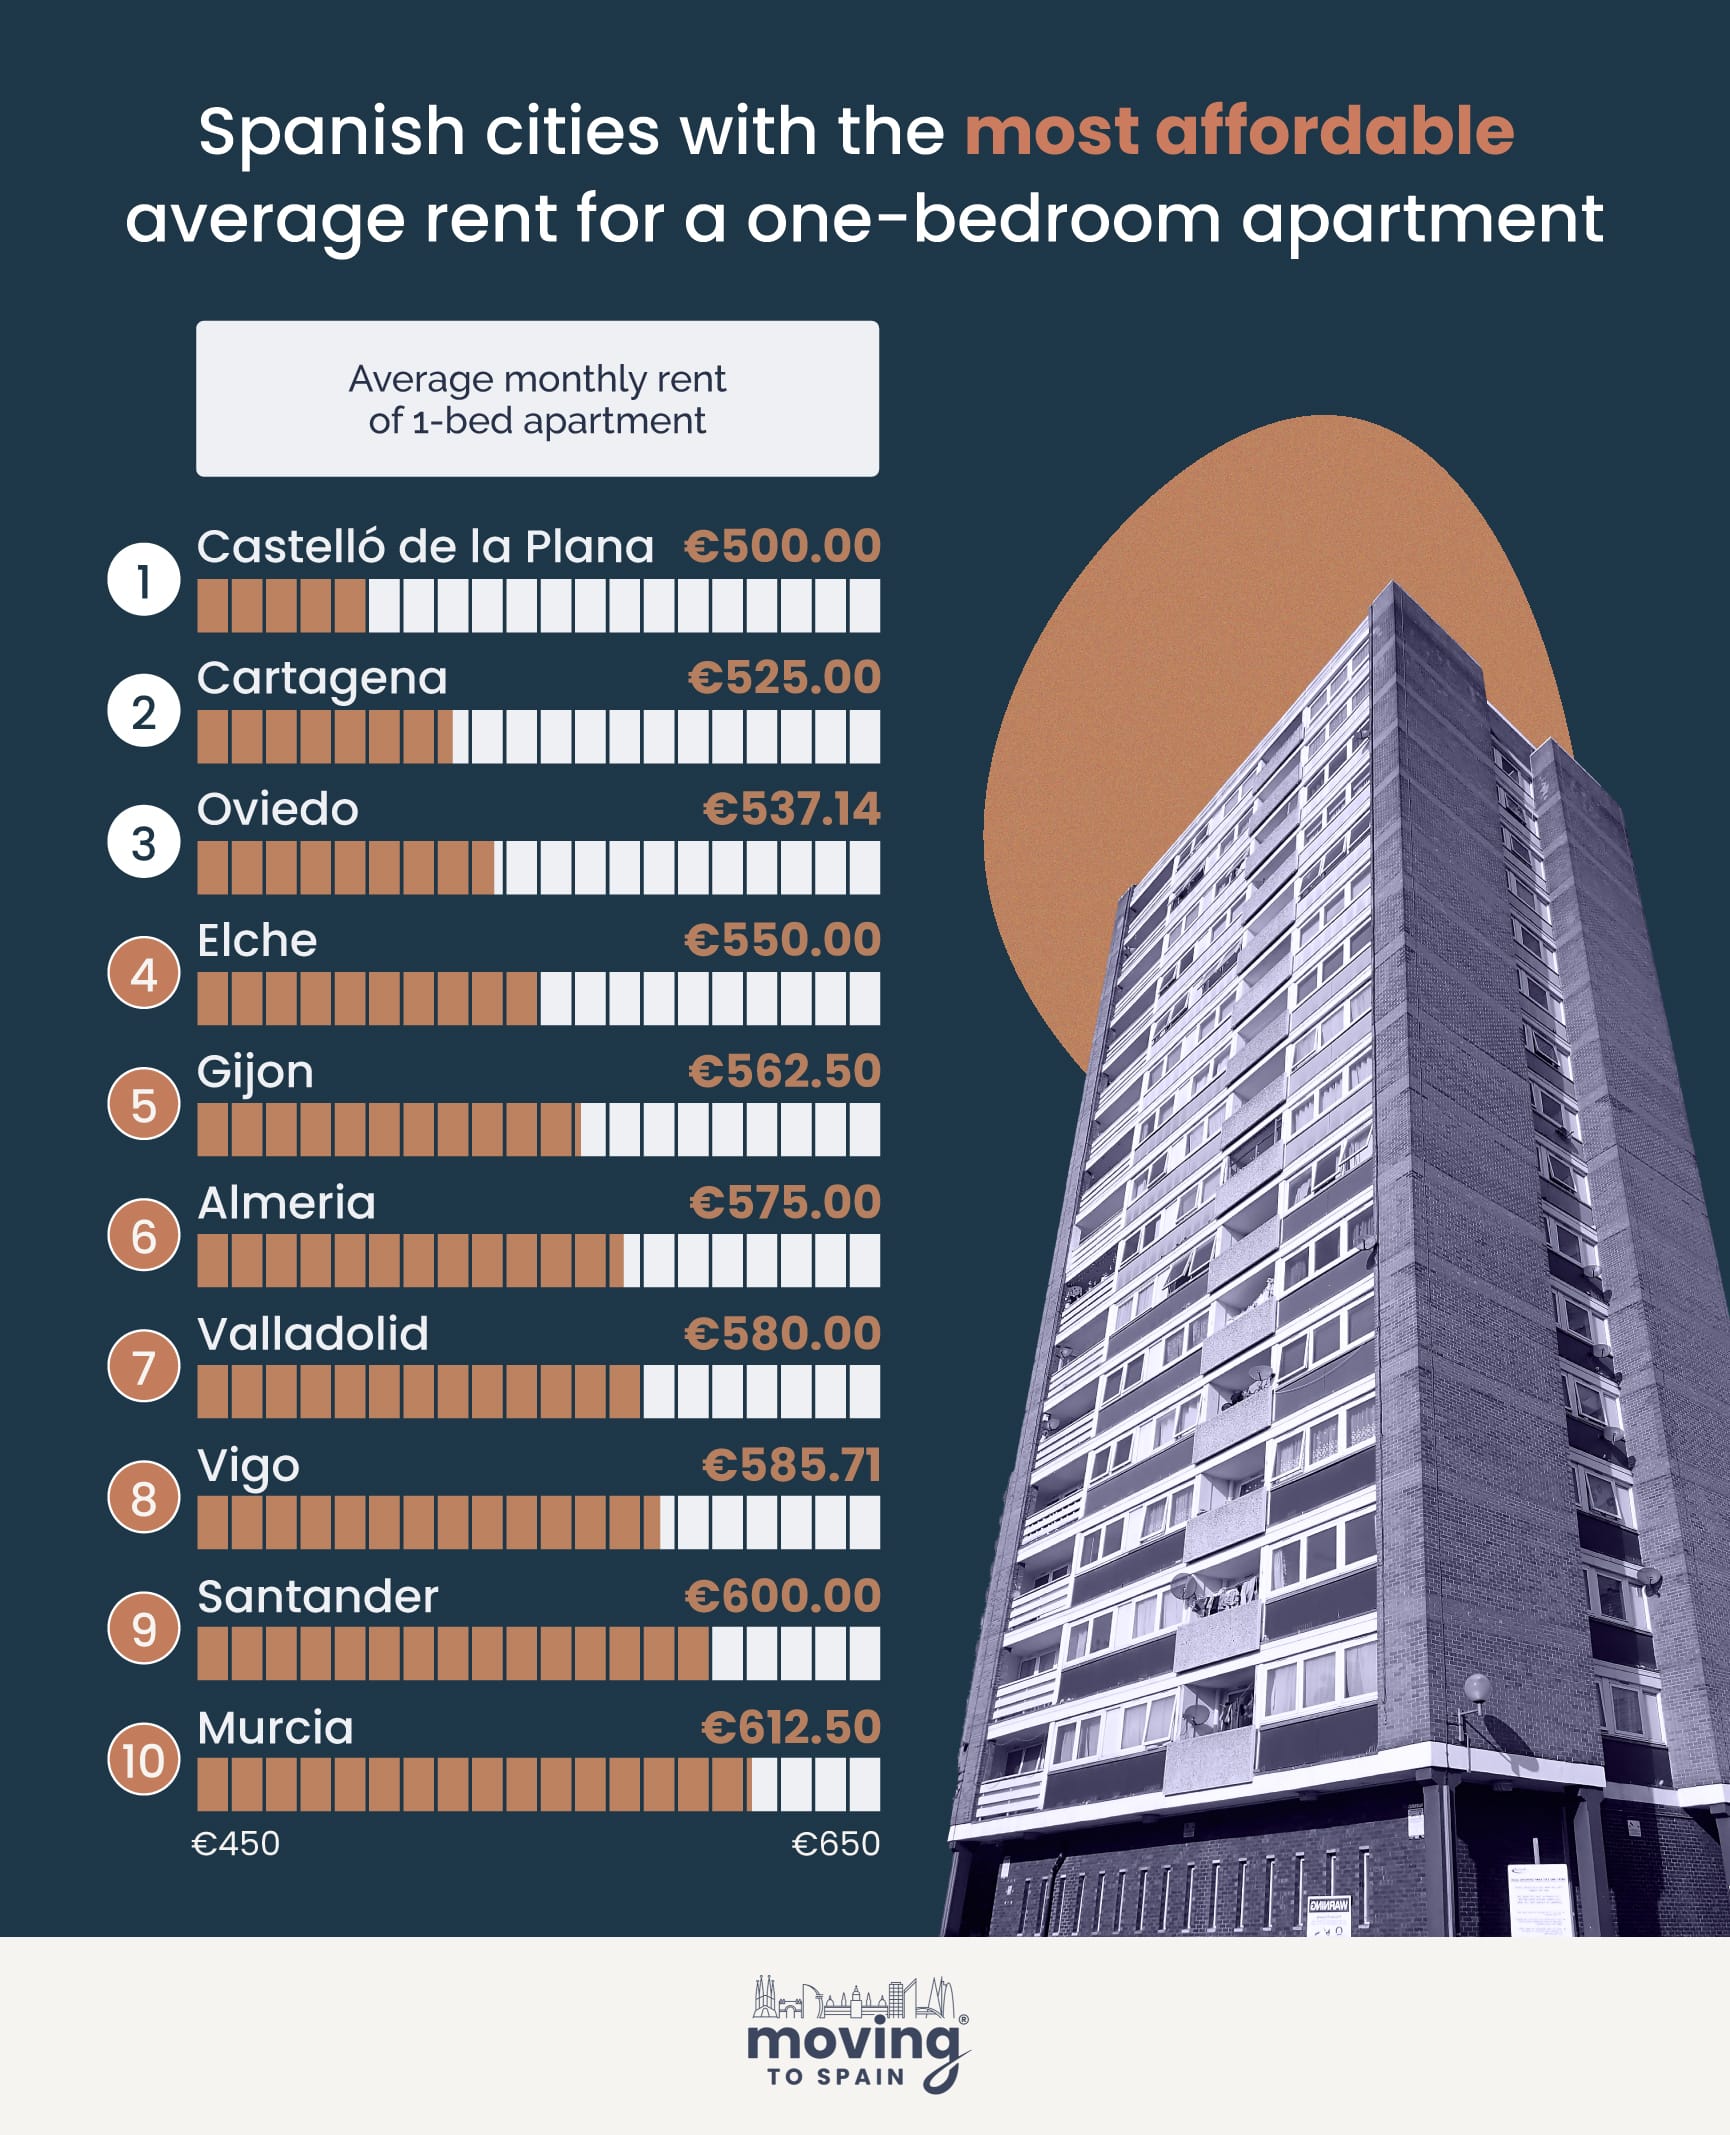 Spanish cities with the most affordable average rent for a one-bedroom apartment